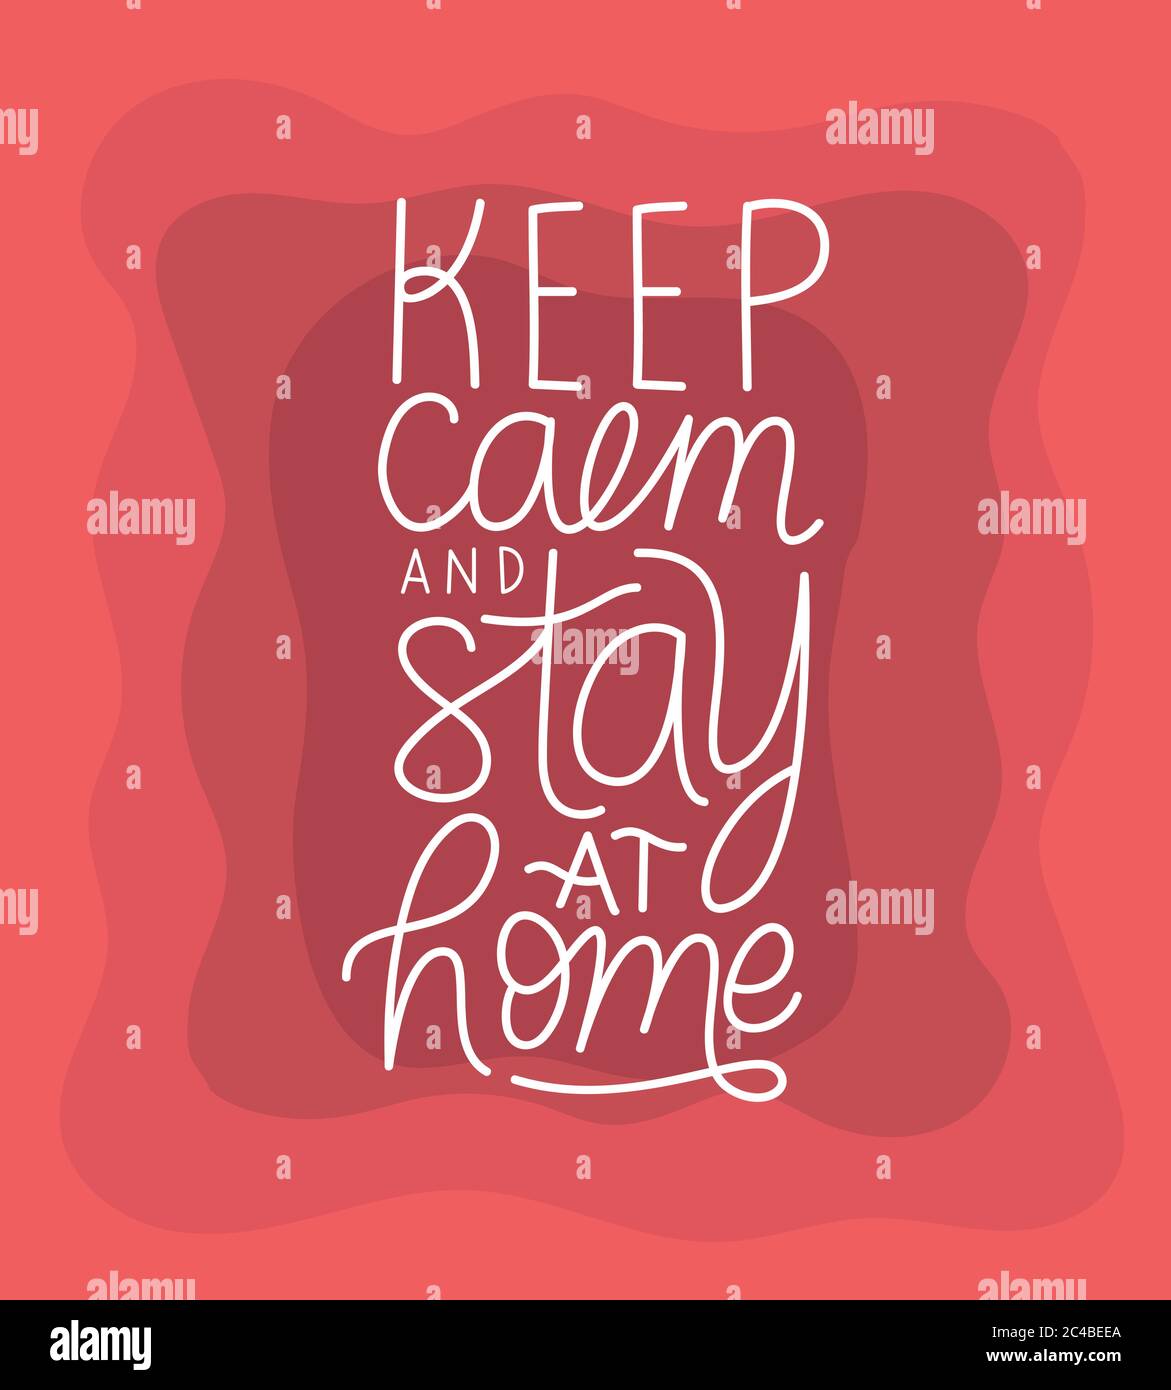 keep calm and stay at home lettering design of Happiness positivity and covid 19 virus theme Vector illustration Stock Vector